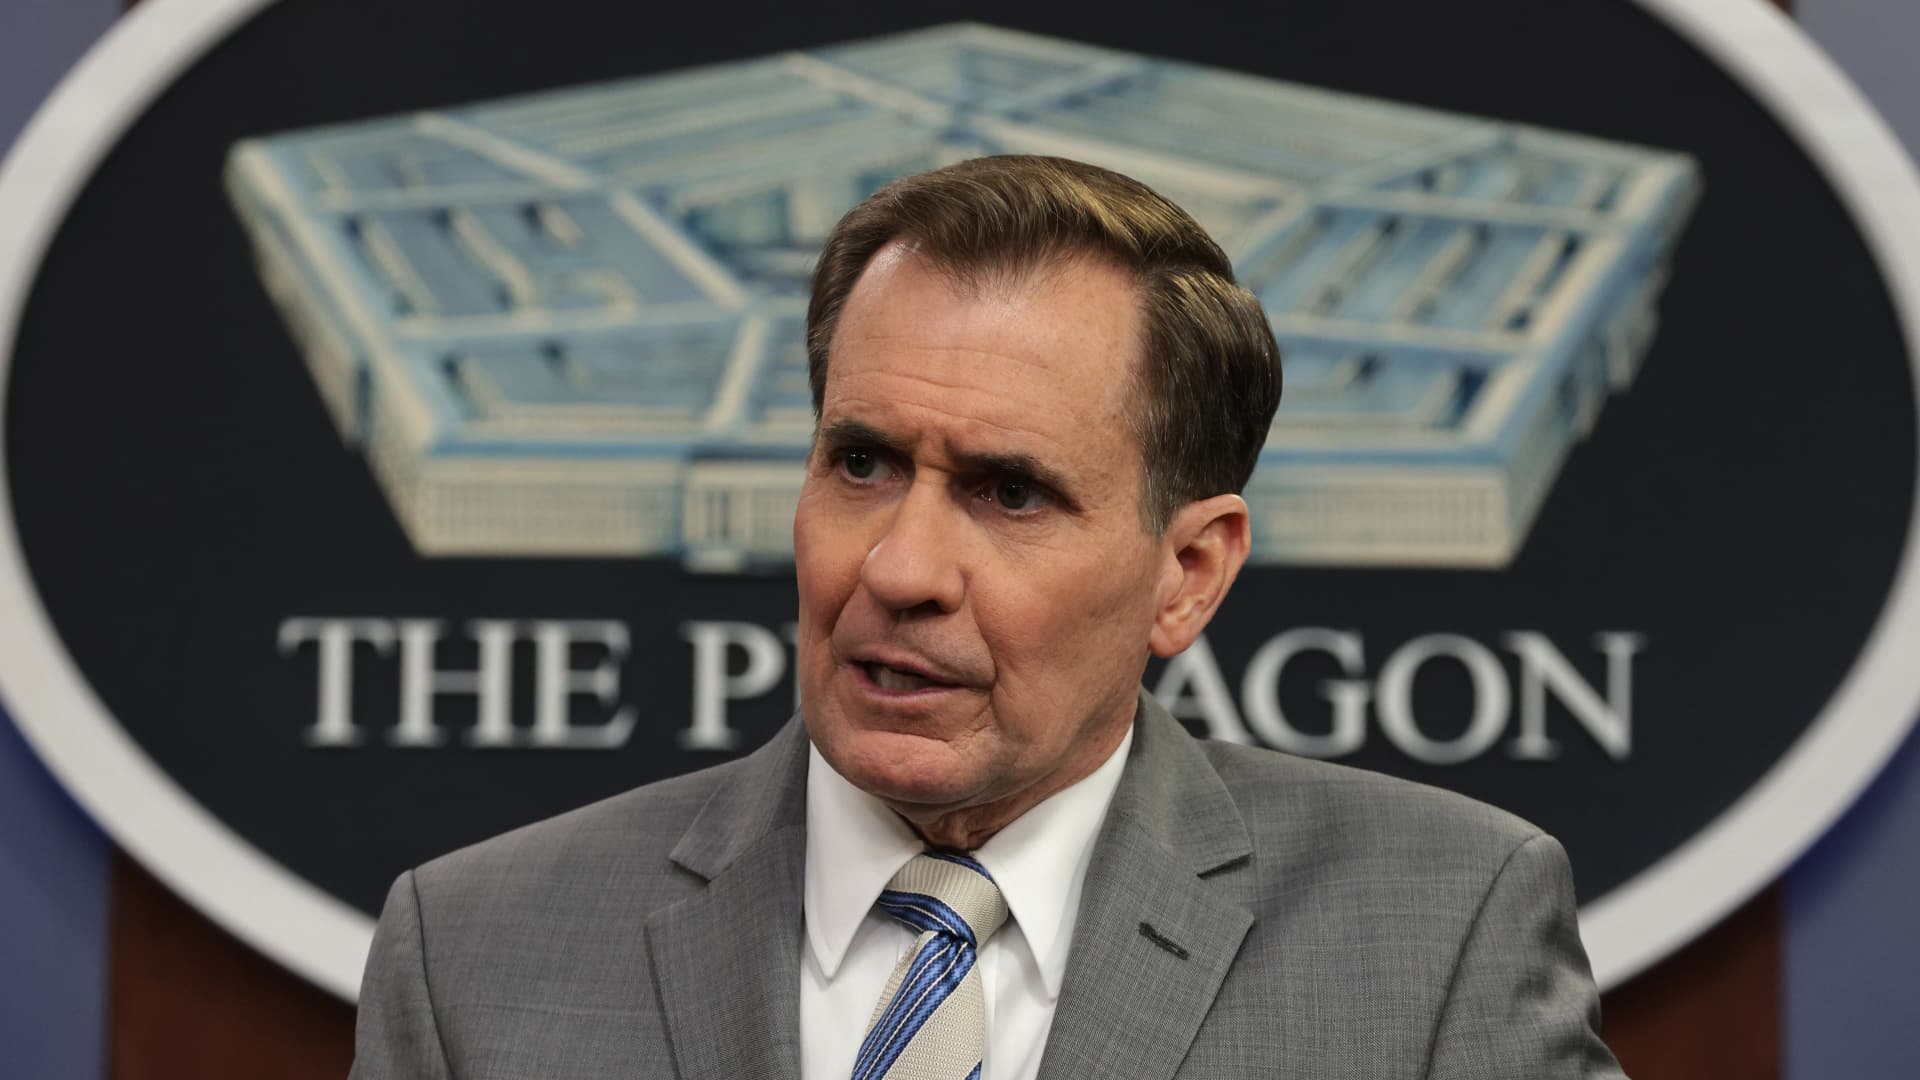 Pentagon Press Secretary John Kirby speaks during a news briefing at the Pentagon April 11, 2022 in Arlington, Virginia. Kirby spoke on various topics including Russia’s invasion of Ukraine. 